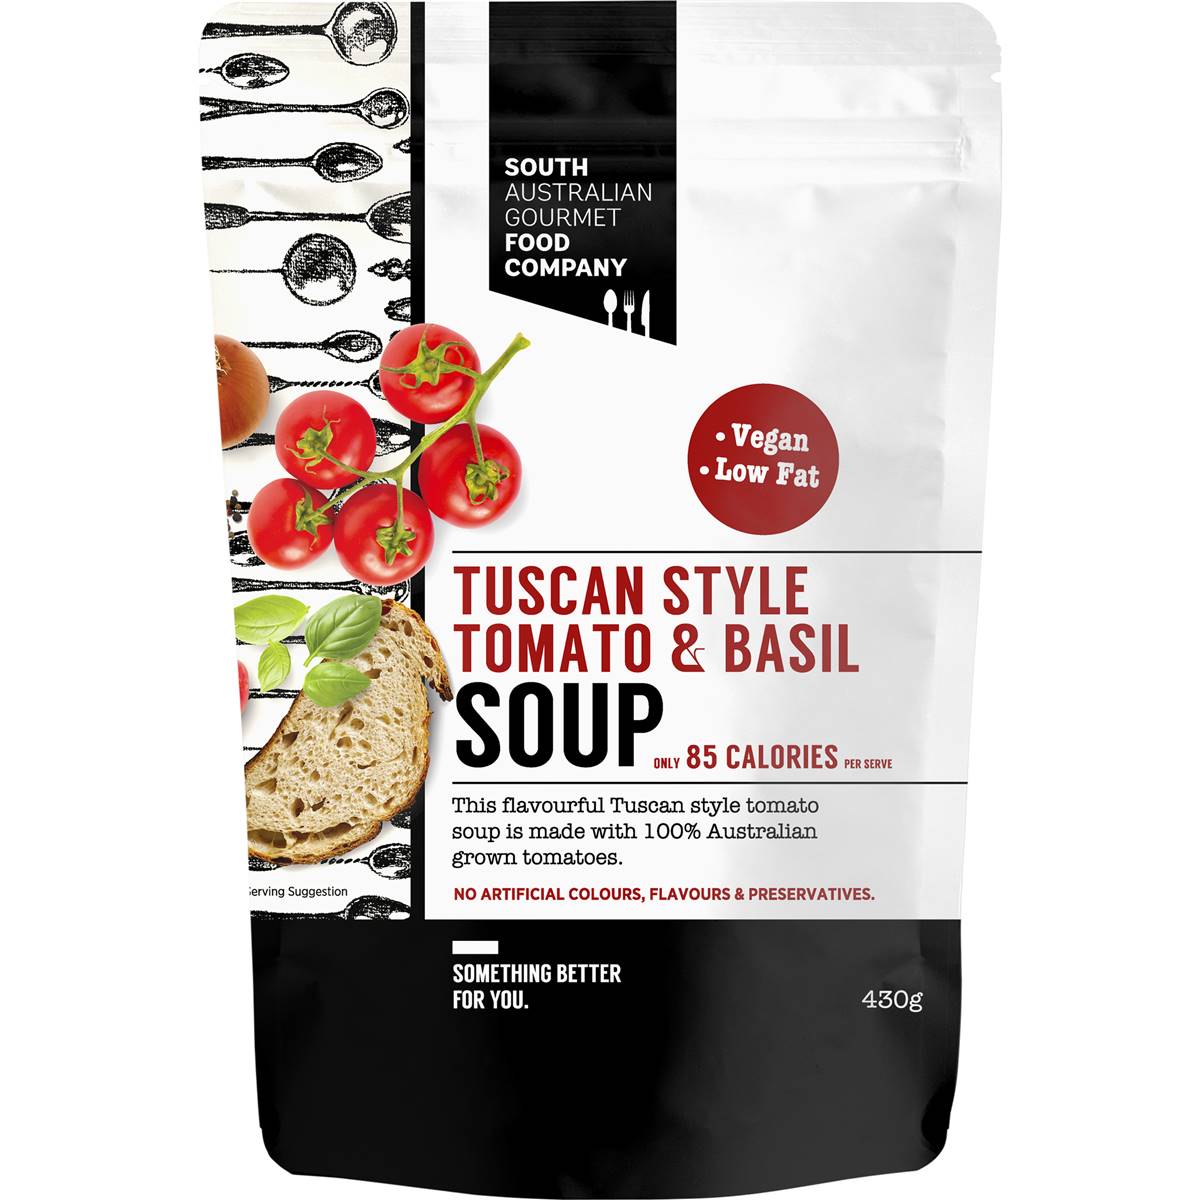 Calories in Sa Gourmet Food Co Tuscan Style Tomato & Basil Soup